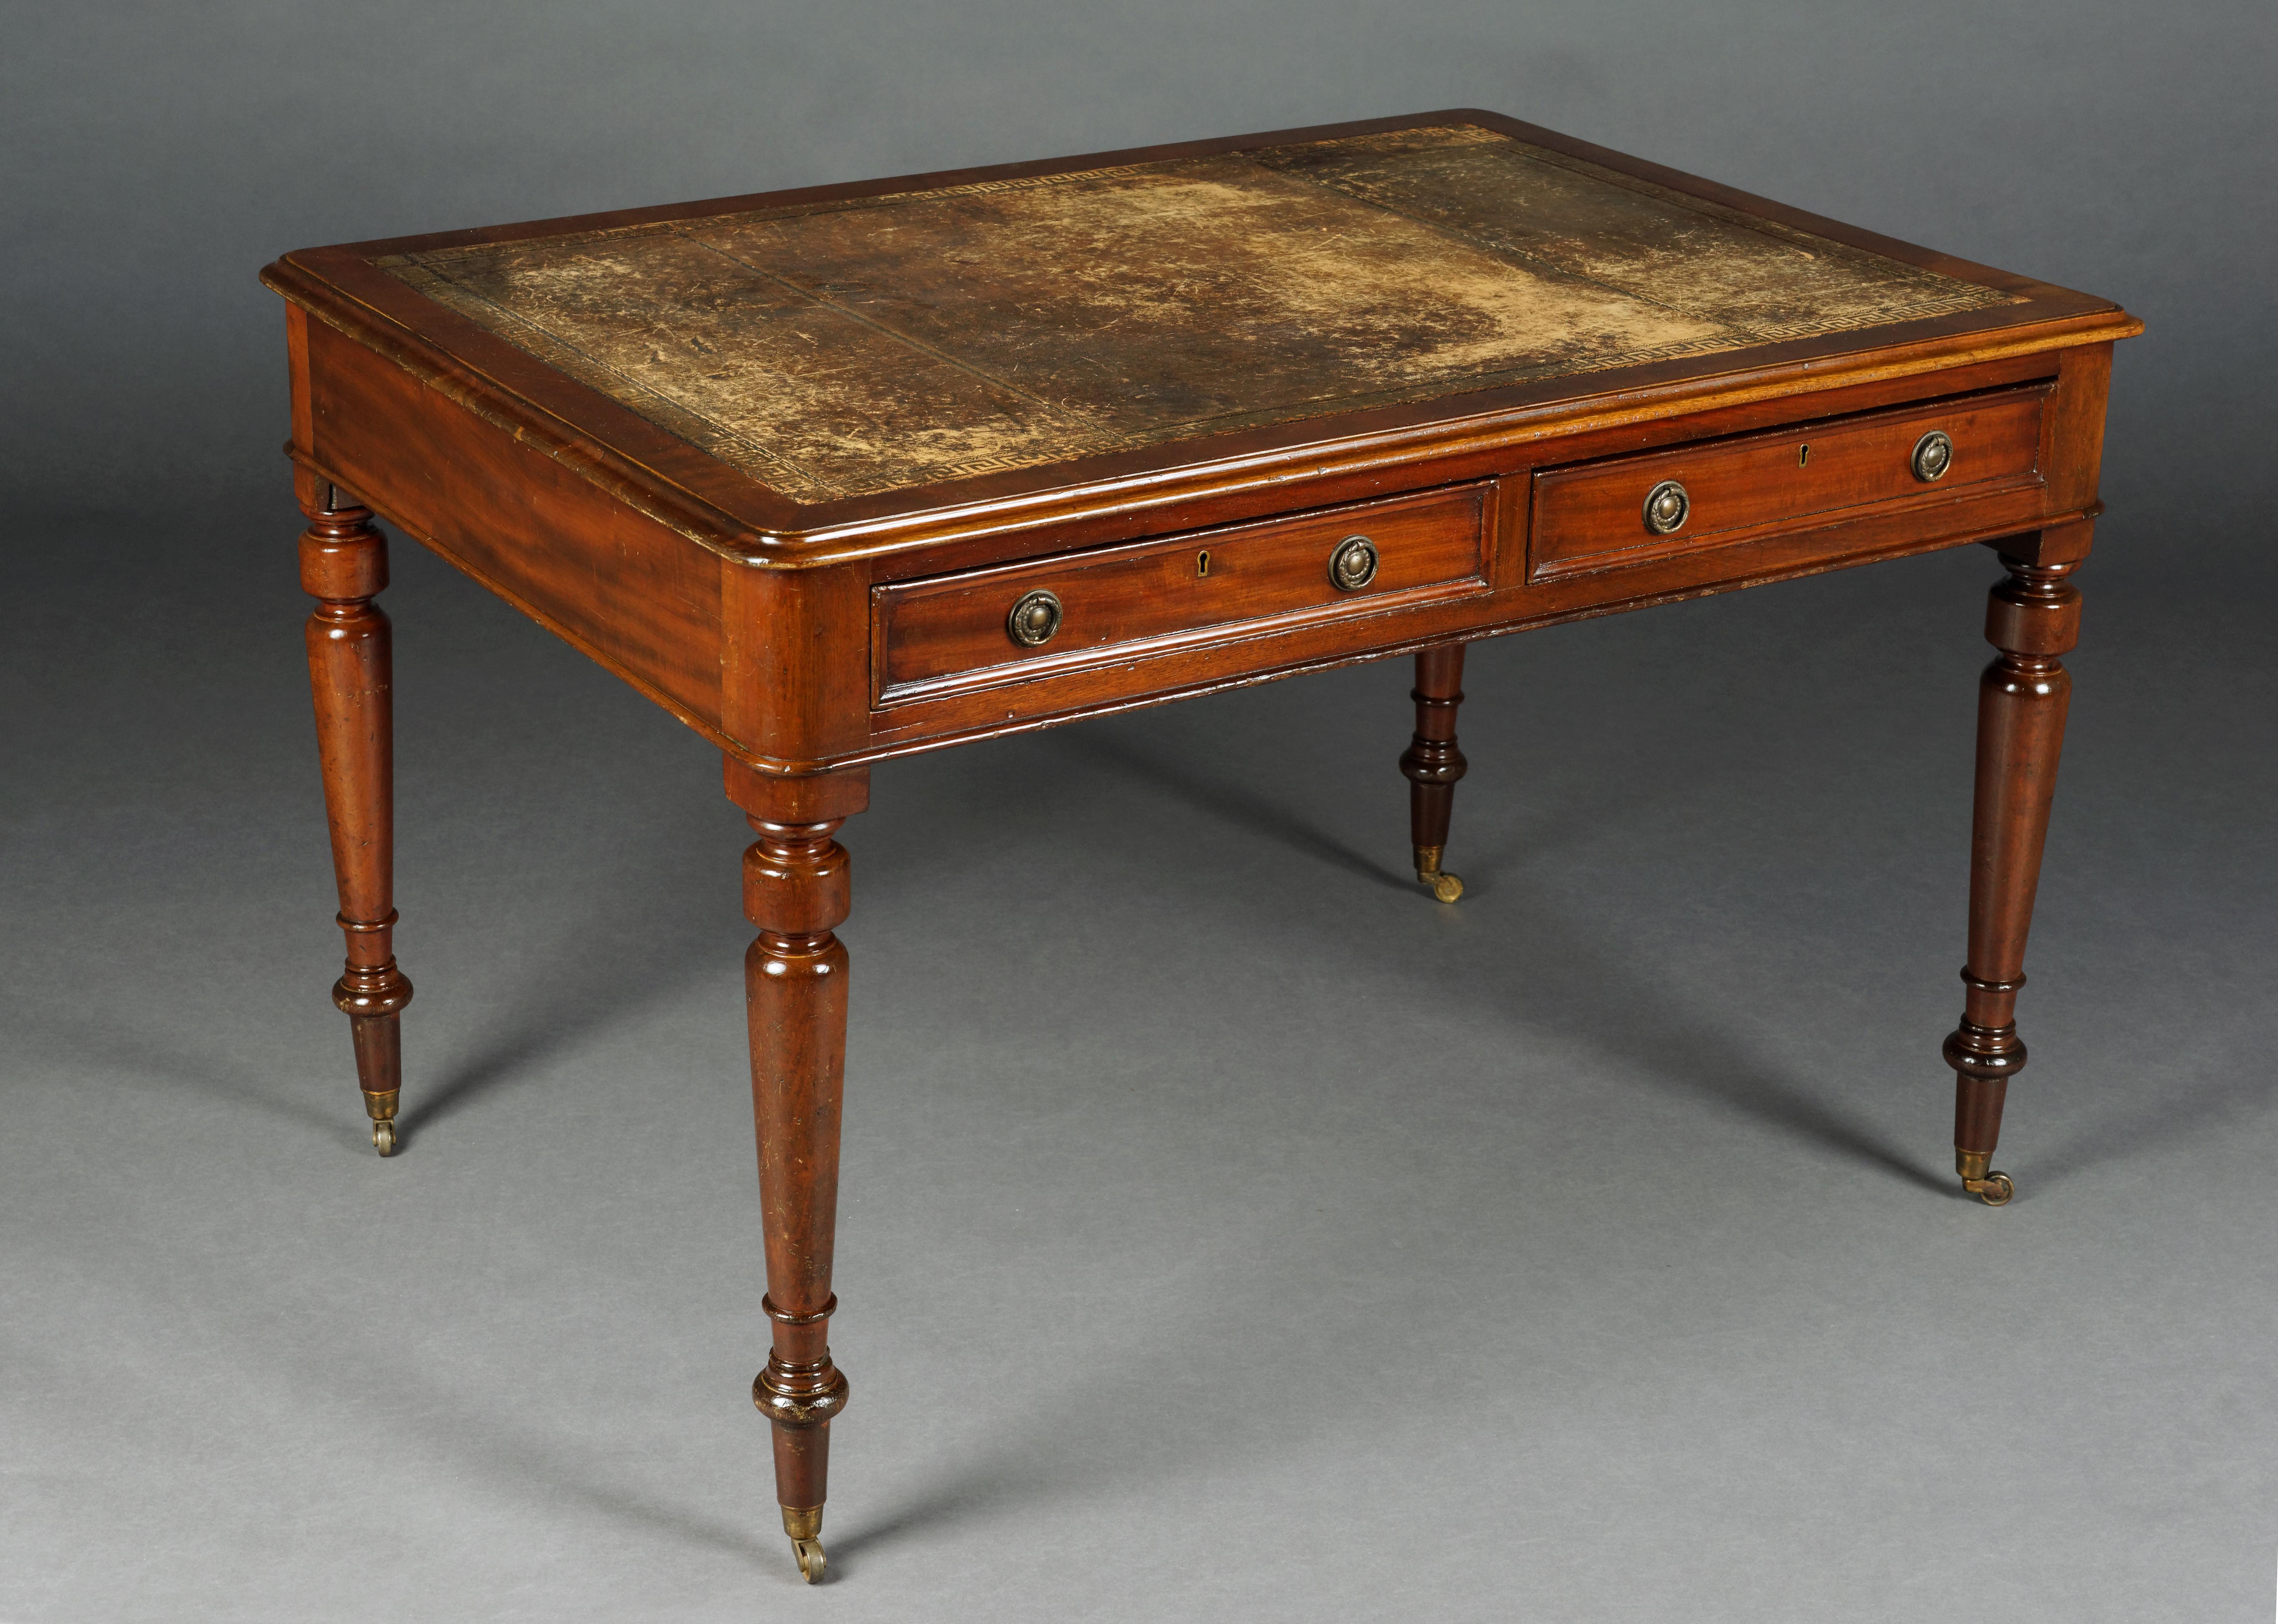 Victorian double desk, England, circa 1850

 On both sides profiled two-chambered frame box on balustrade-shaped legs ending in rolling feet, slightly protruding tabletop. Writing surface with exceptional gold embossed. Decorative brass fittings